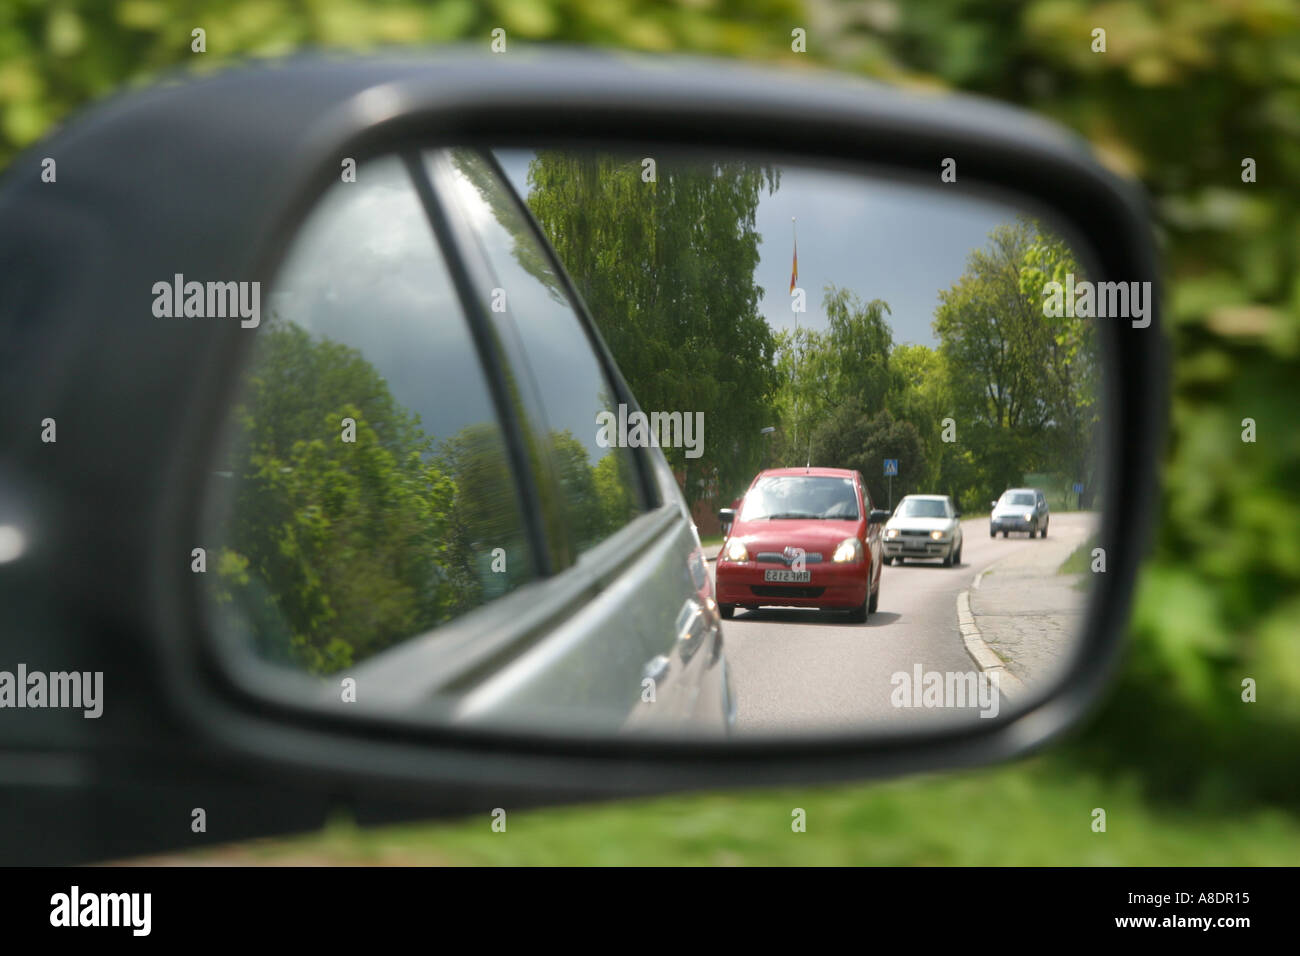 Loocking through the right side mirror of a car Stock Photo